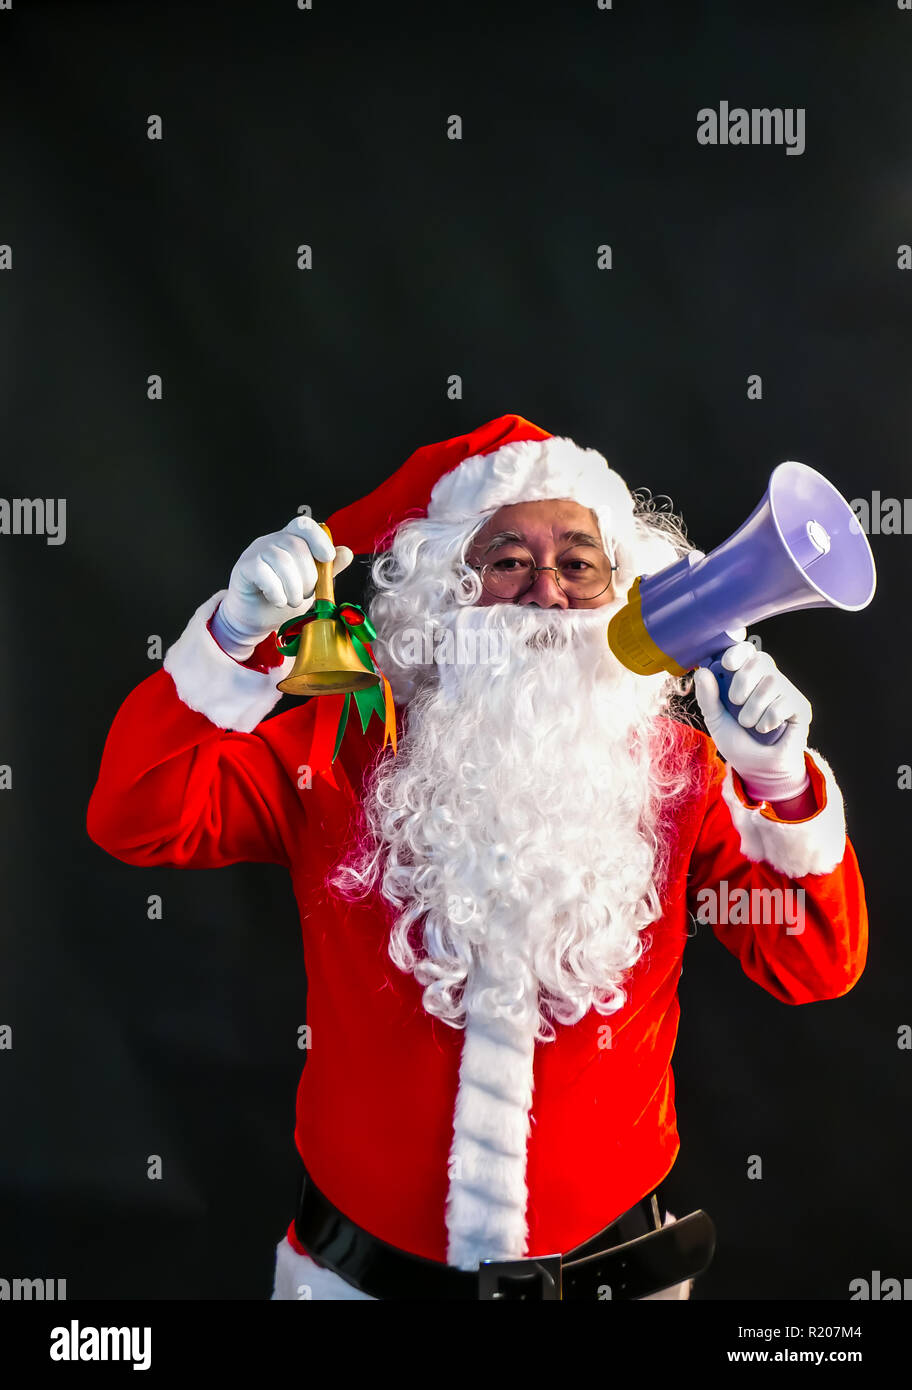 Santa Claus speaks on megaphone on his right hand & ring a bell on his lift hand studio shot on black background for family, giving, season, Christmas Stock Photo